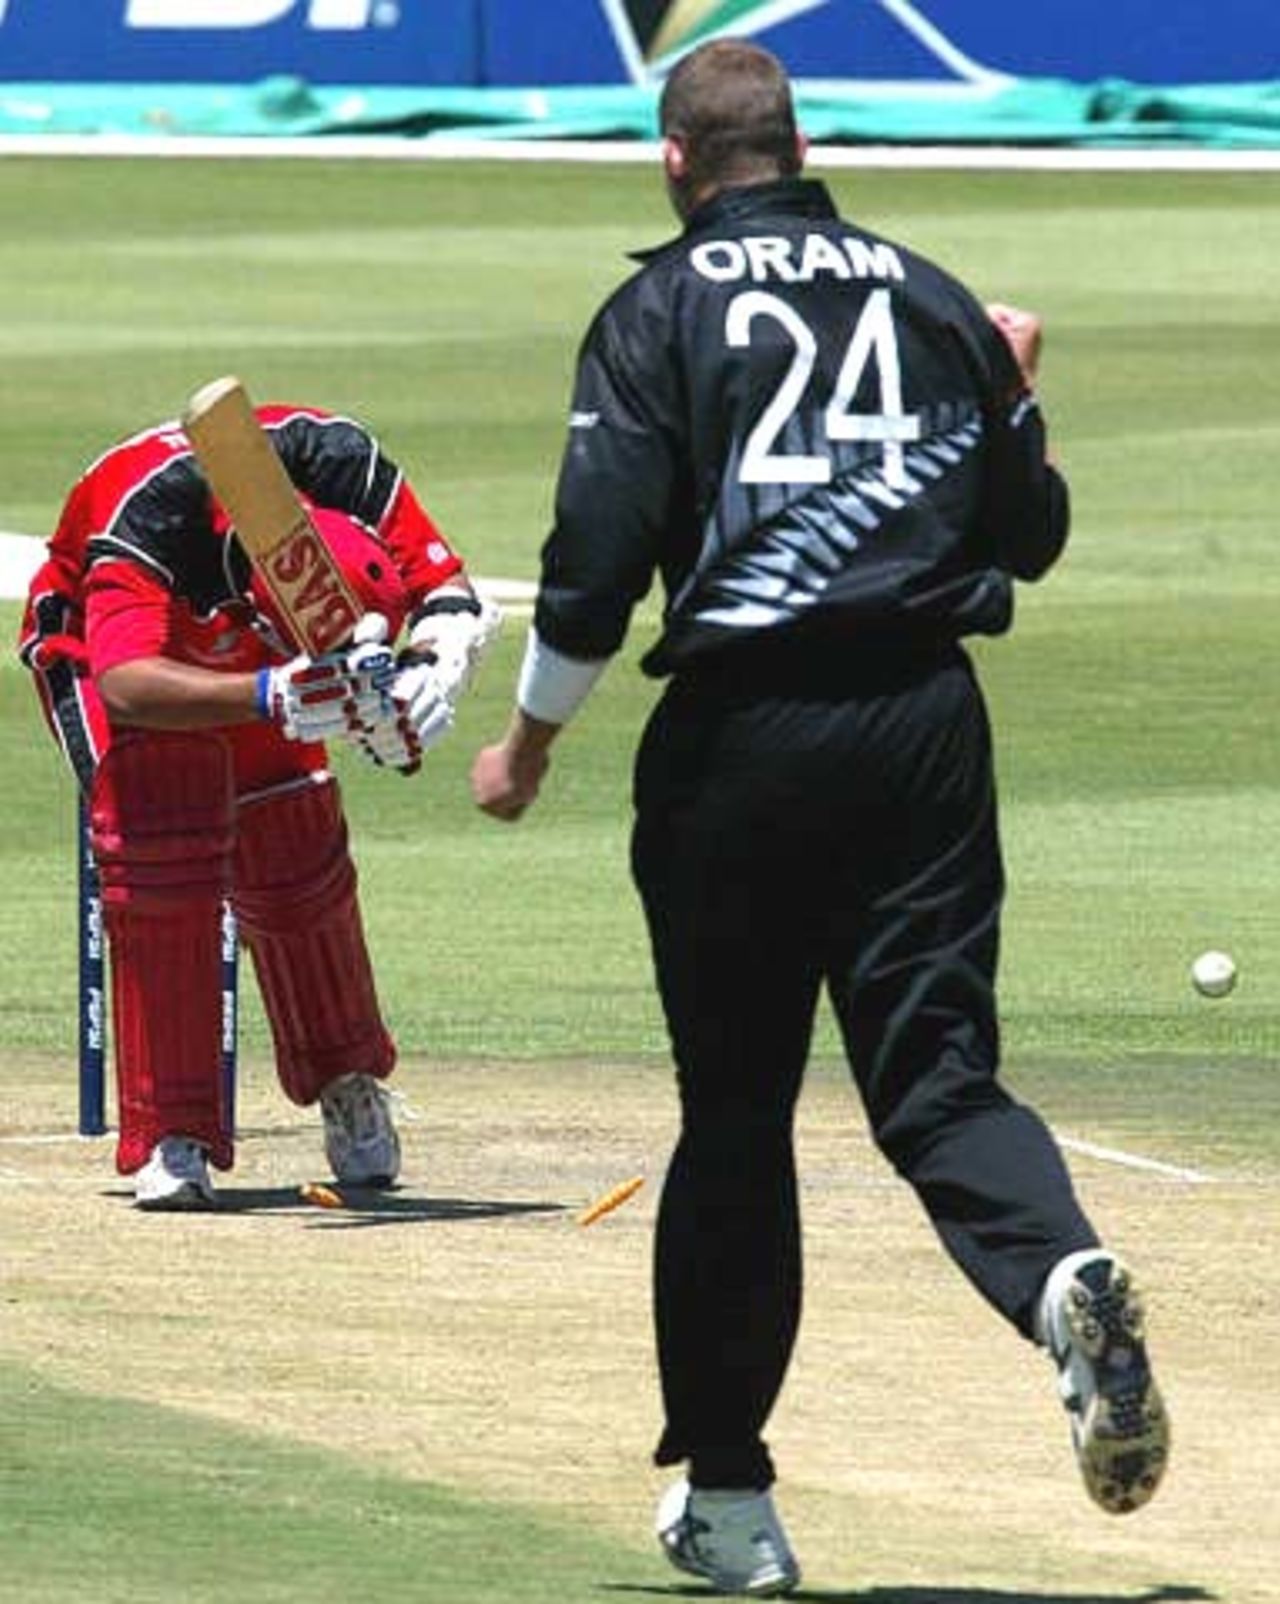 World Cup, 2003 - Canada v New Zealand at Benoni, 3rd March 2003